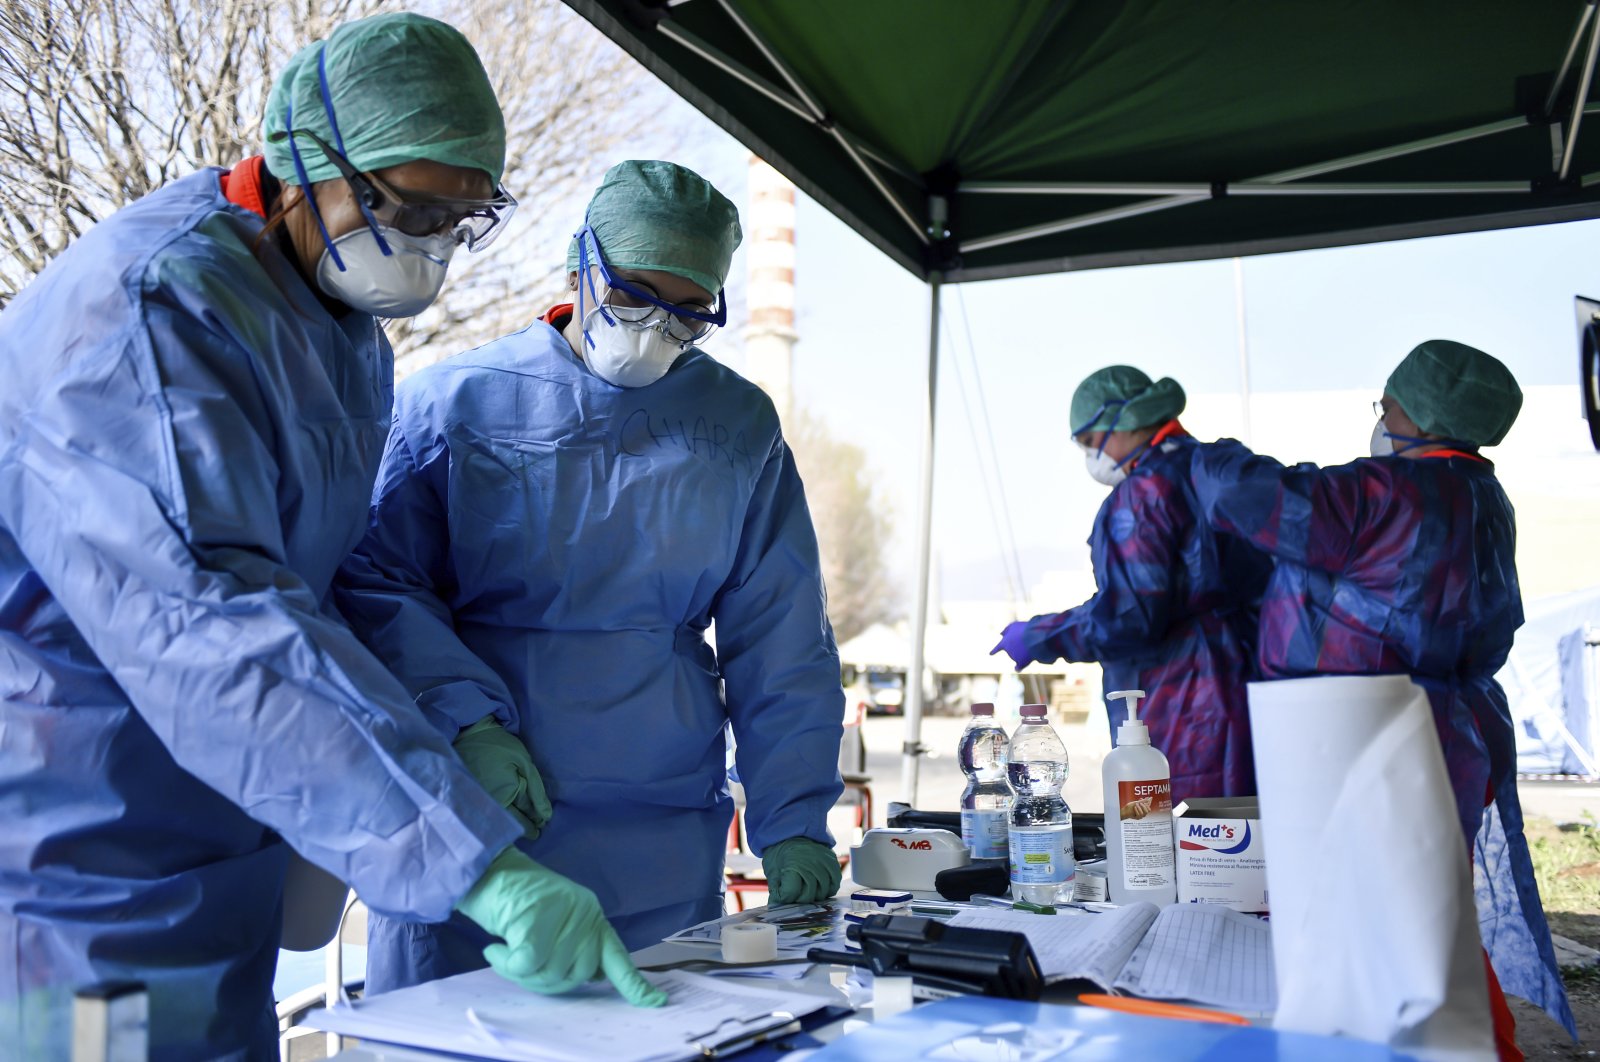 Medical personnel help each other to dress, in background, as others check papers at an emergency tent set up outside the hospital for first evaluation, in Brescia, Northern Italy, Tuesday, March 17, 2020. (LaPresse via AP)